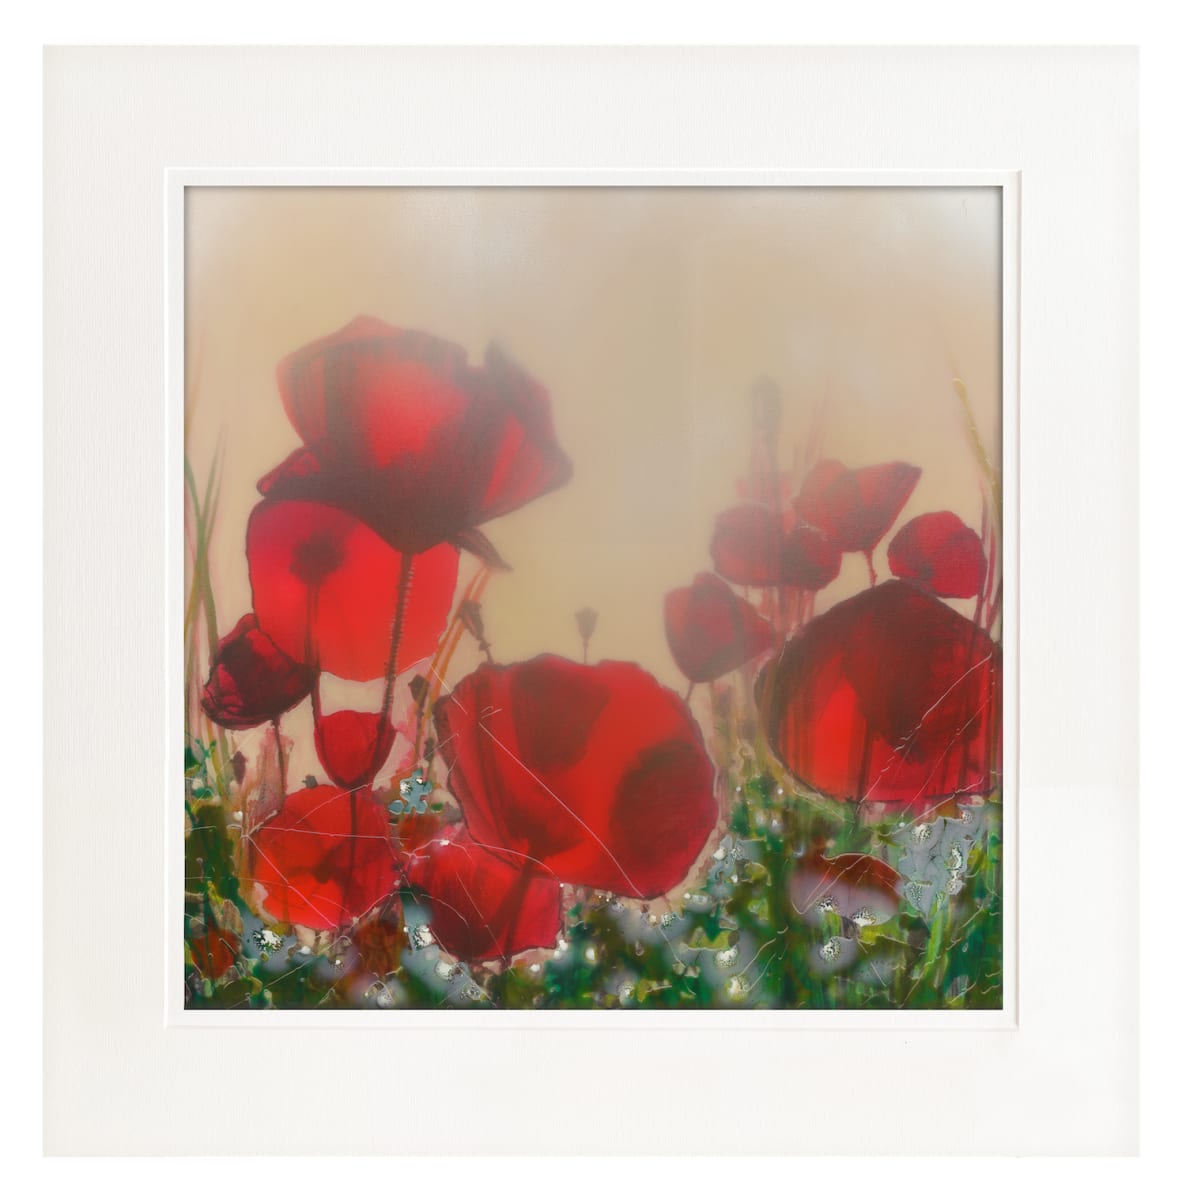 Wall art prints | Limited Edition Print | Poppy Haze - Signed Limited Edition Print with mount (unframed) - 150 in edition Proof 5 